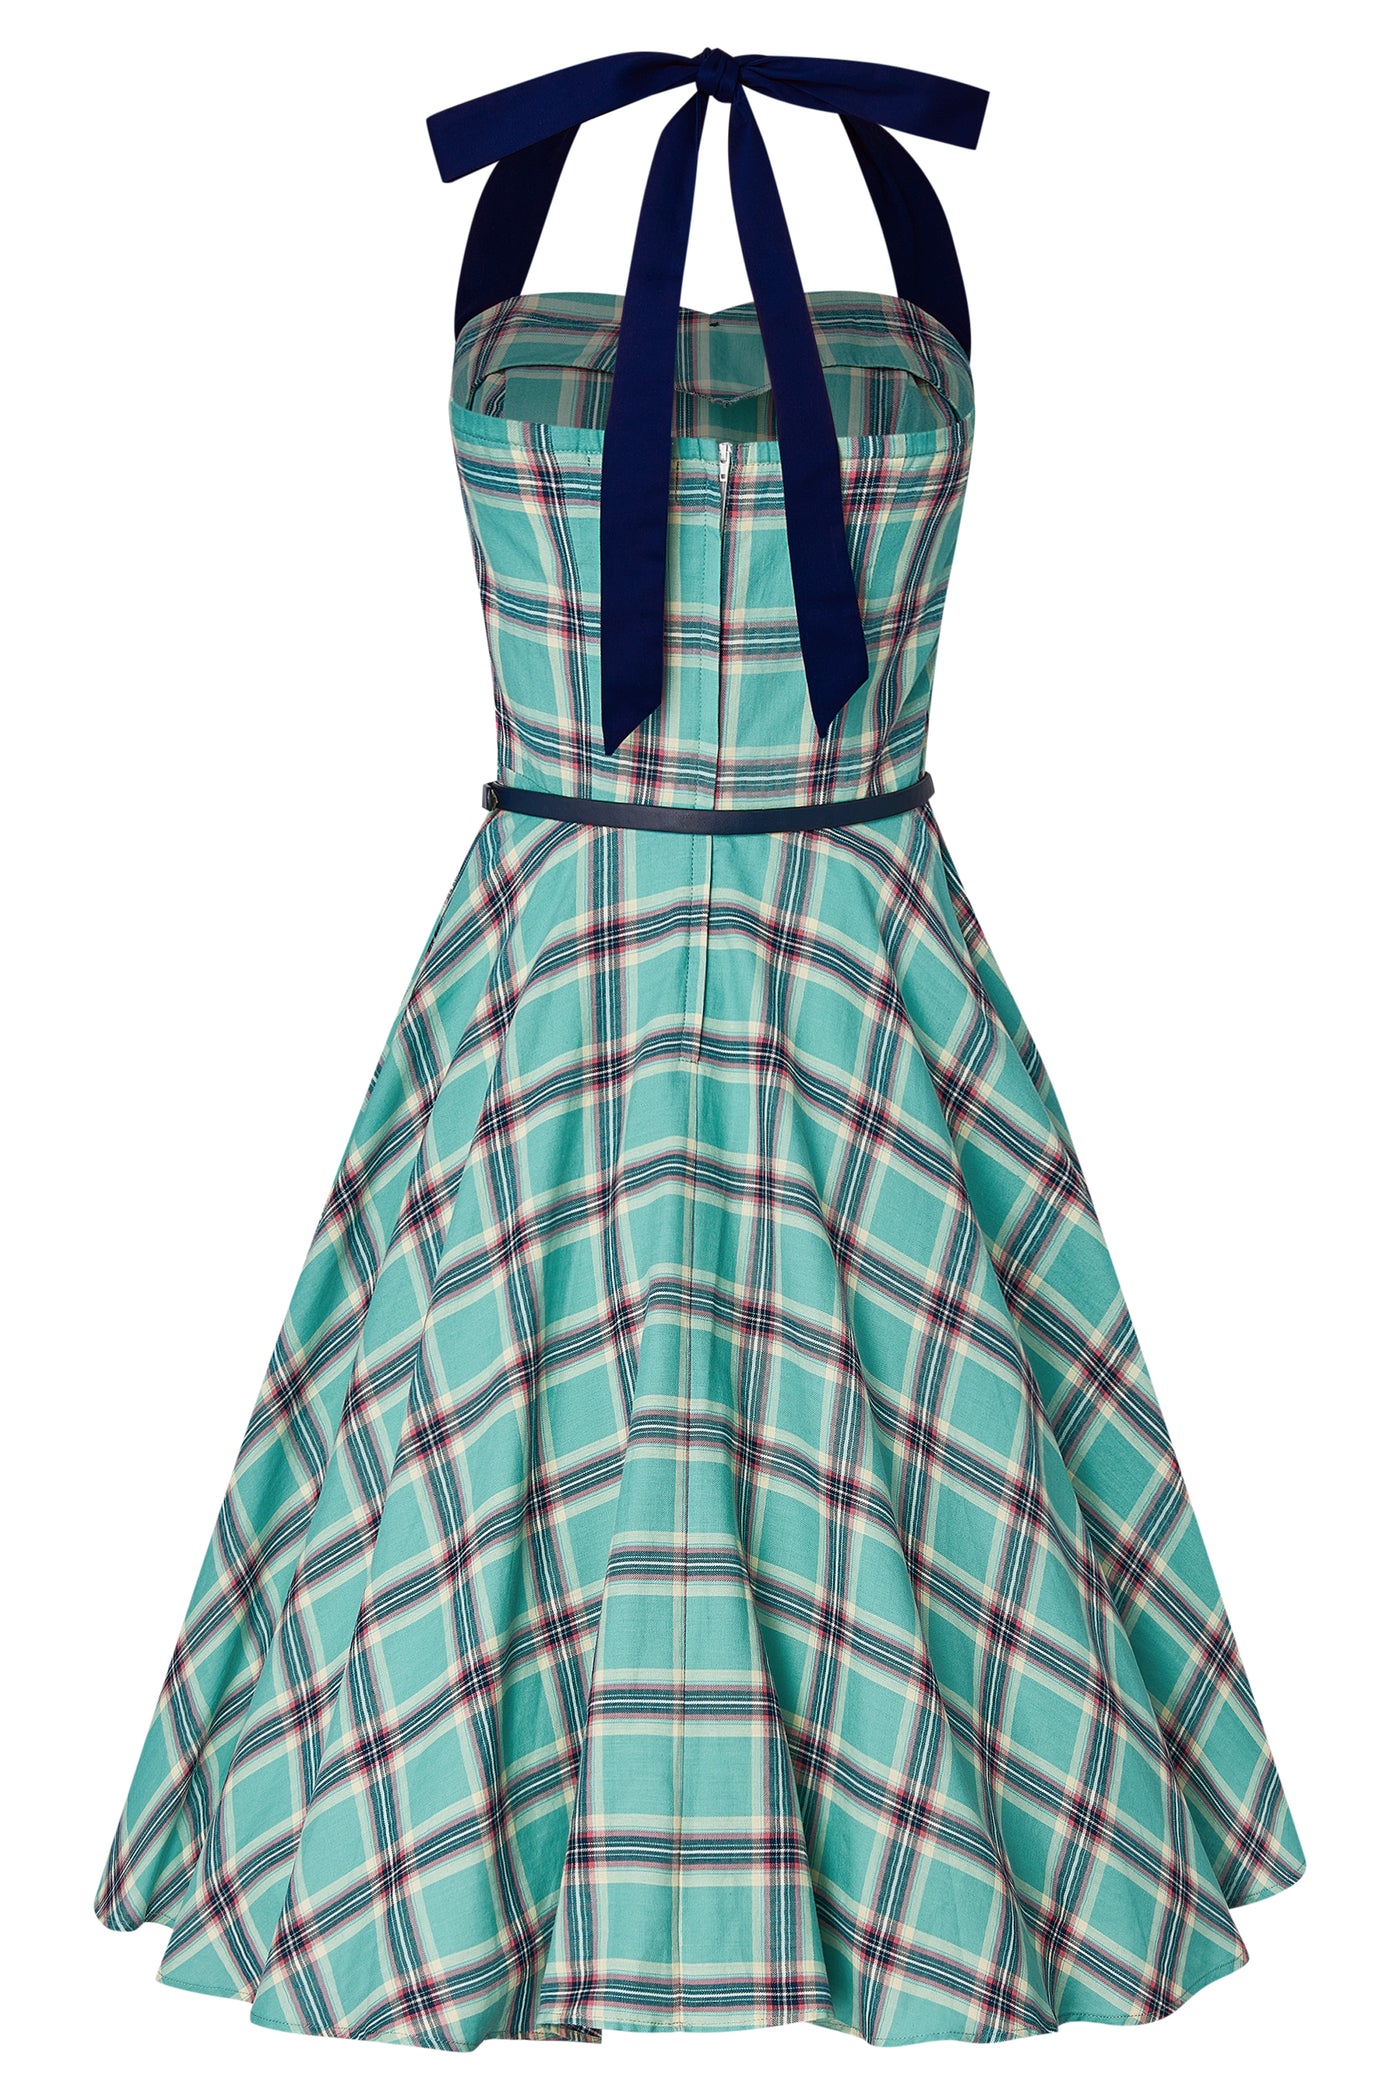 Woman's Rockabilly 1950's Check Halterneck Dress in Turquoise